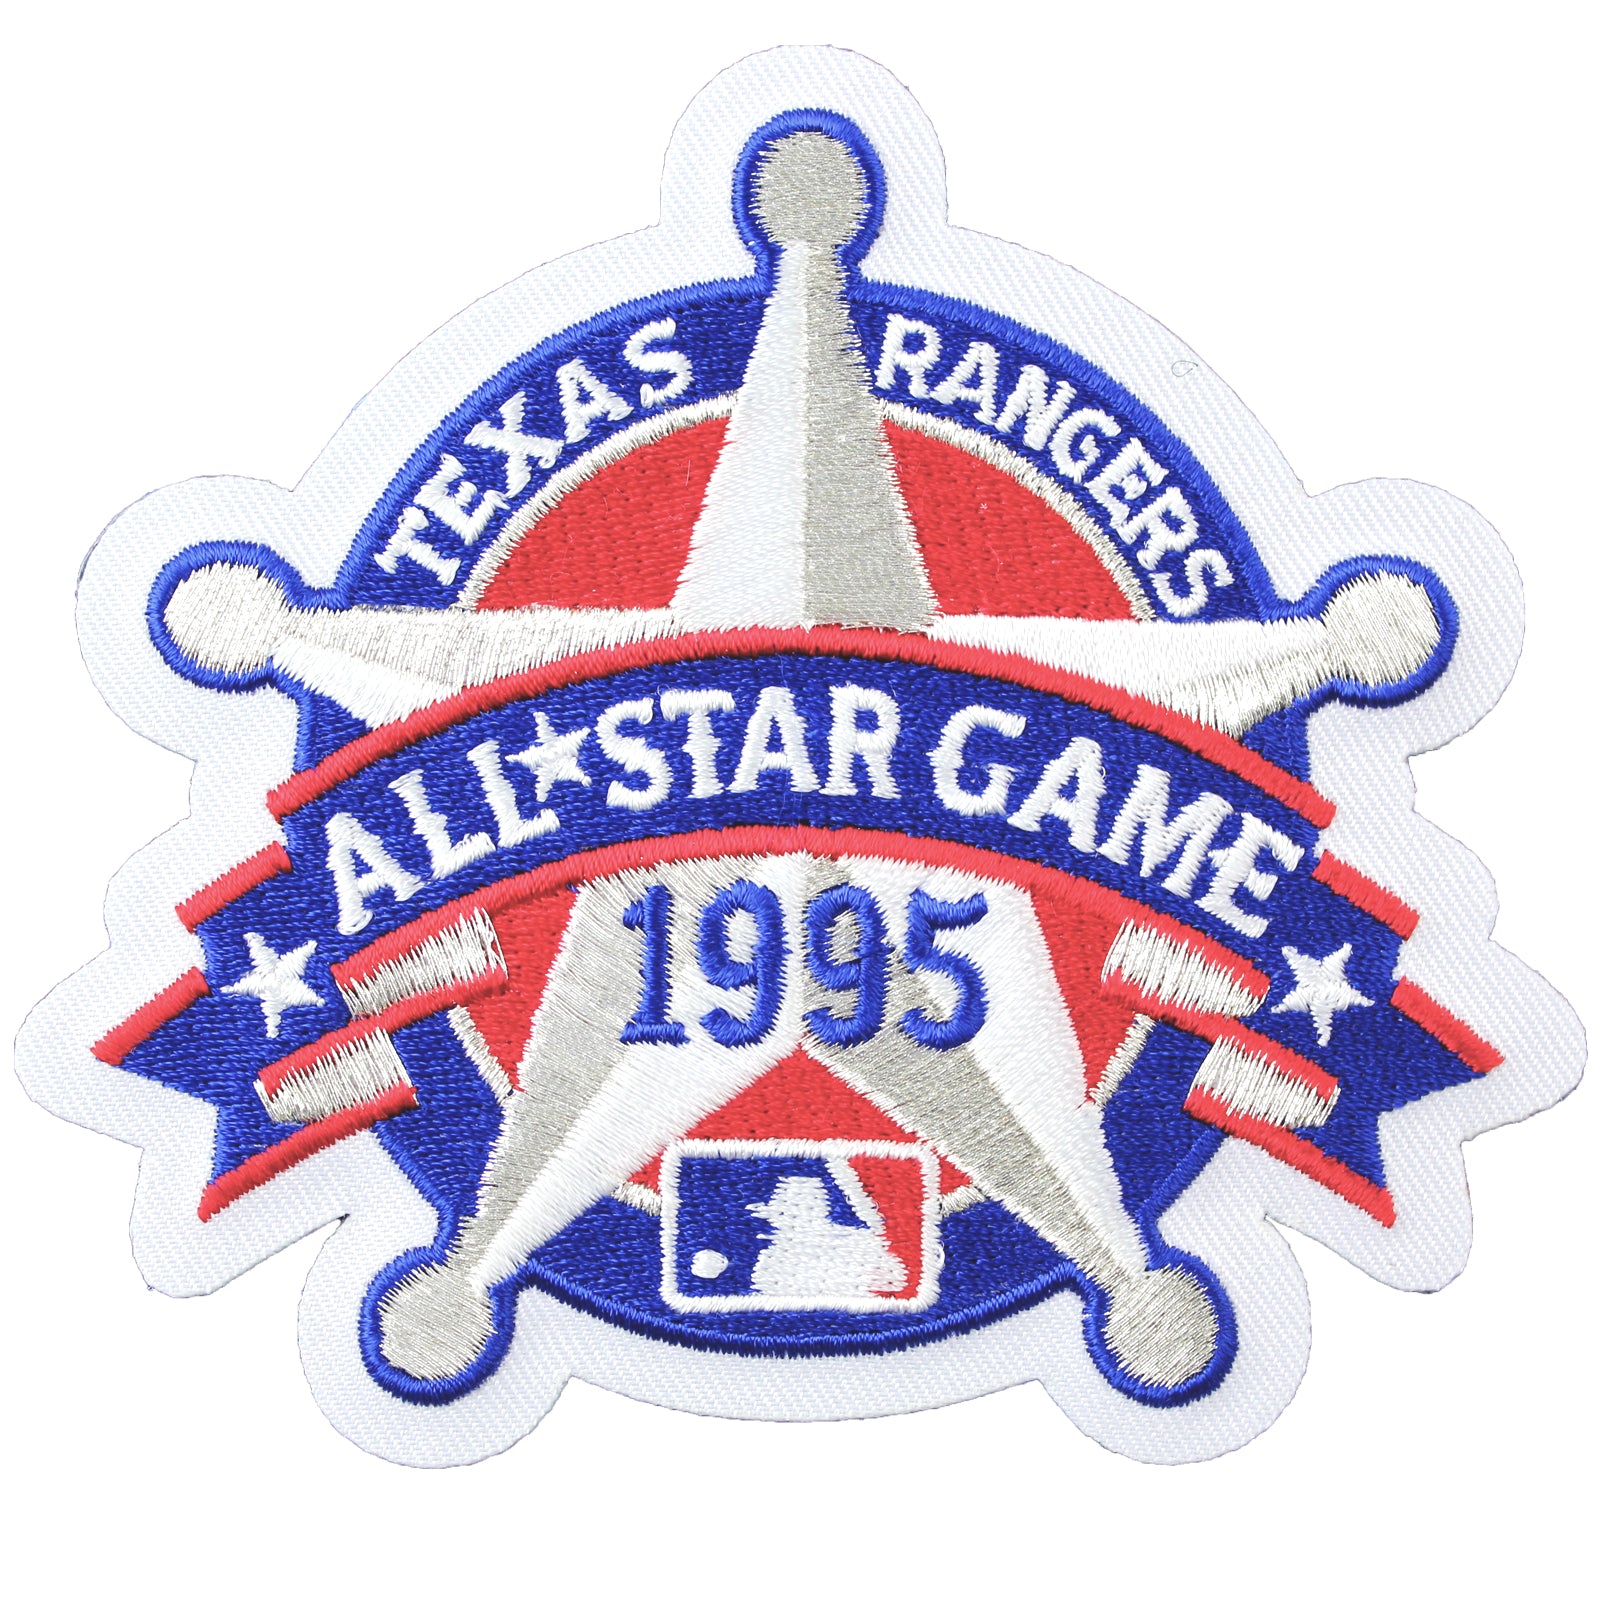 1988 Fleer Team Logos/Stadium Stickers Baseball Texas Rangers Texas Rangers  Official MLB Trading Card From The Fleer Corp. at 's Sports  Collectibles Store